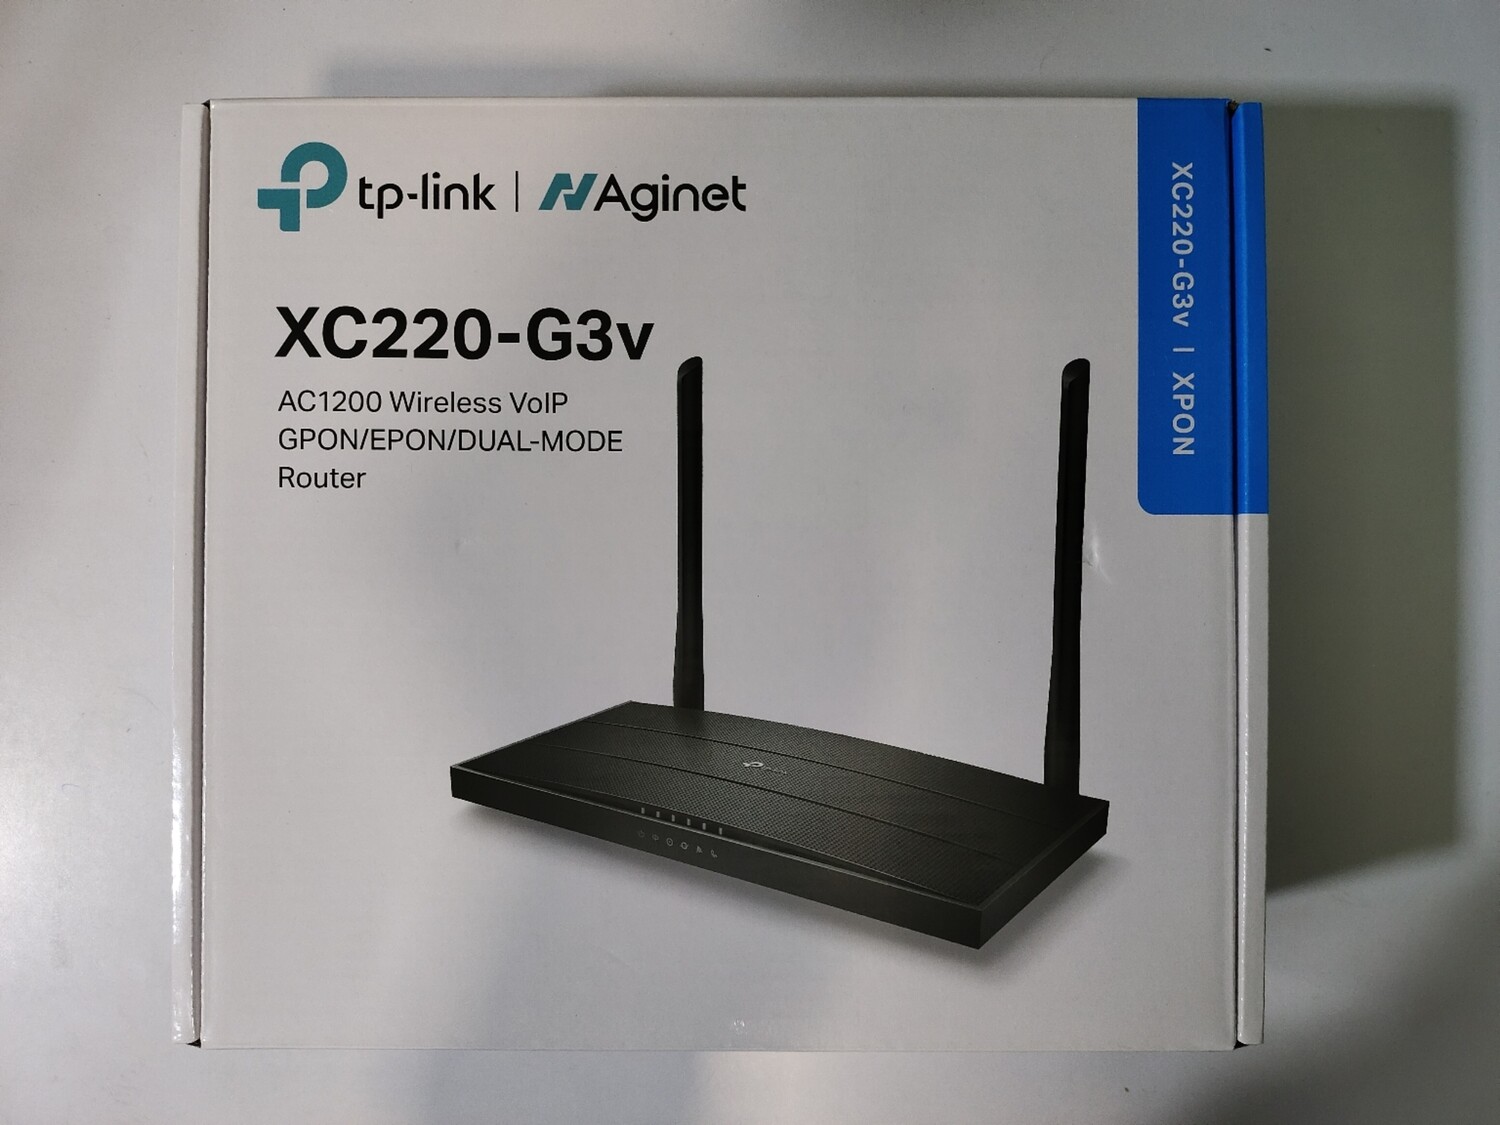 TP Link XC220-G3v AC1200 Wireless VoIP XPON Router